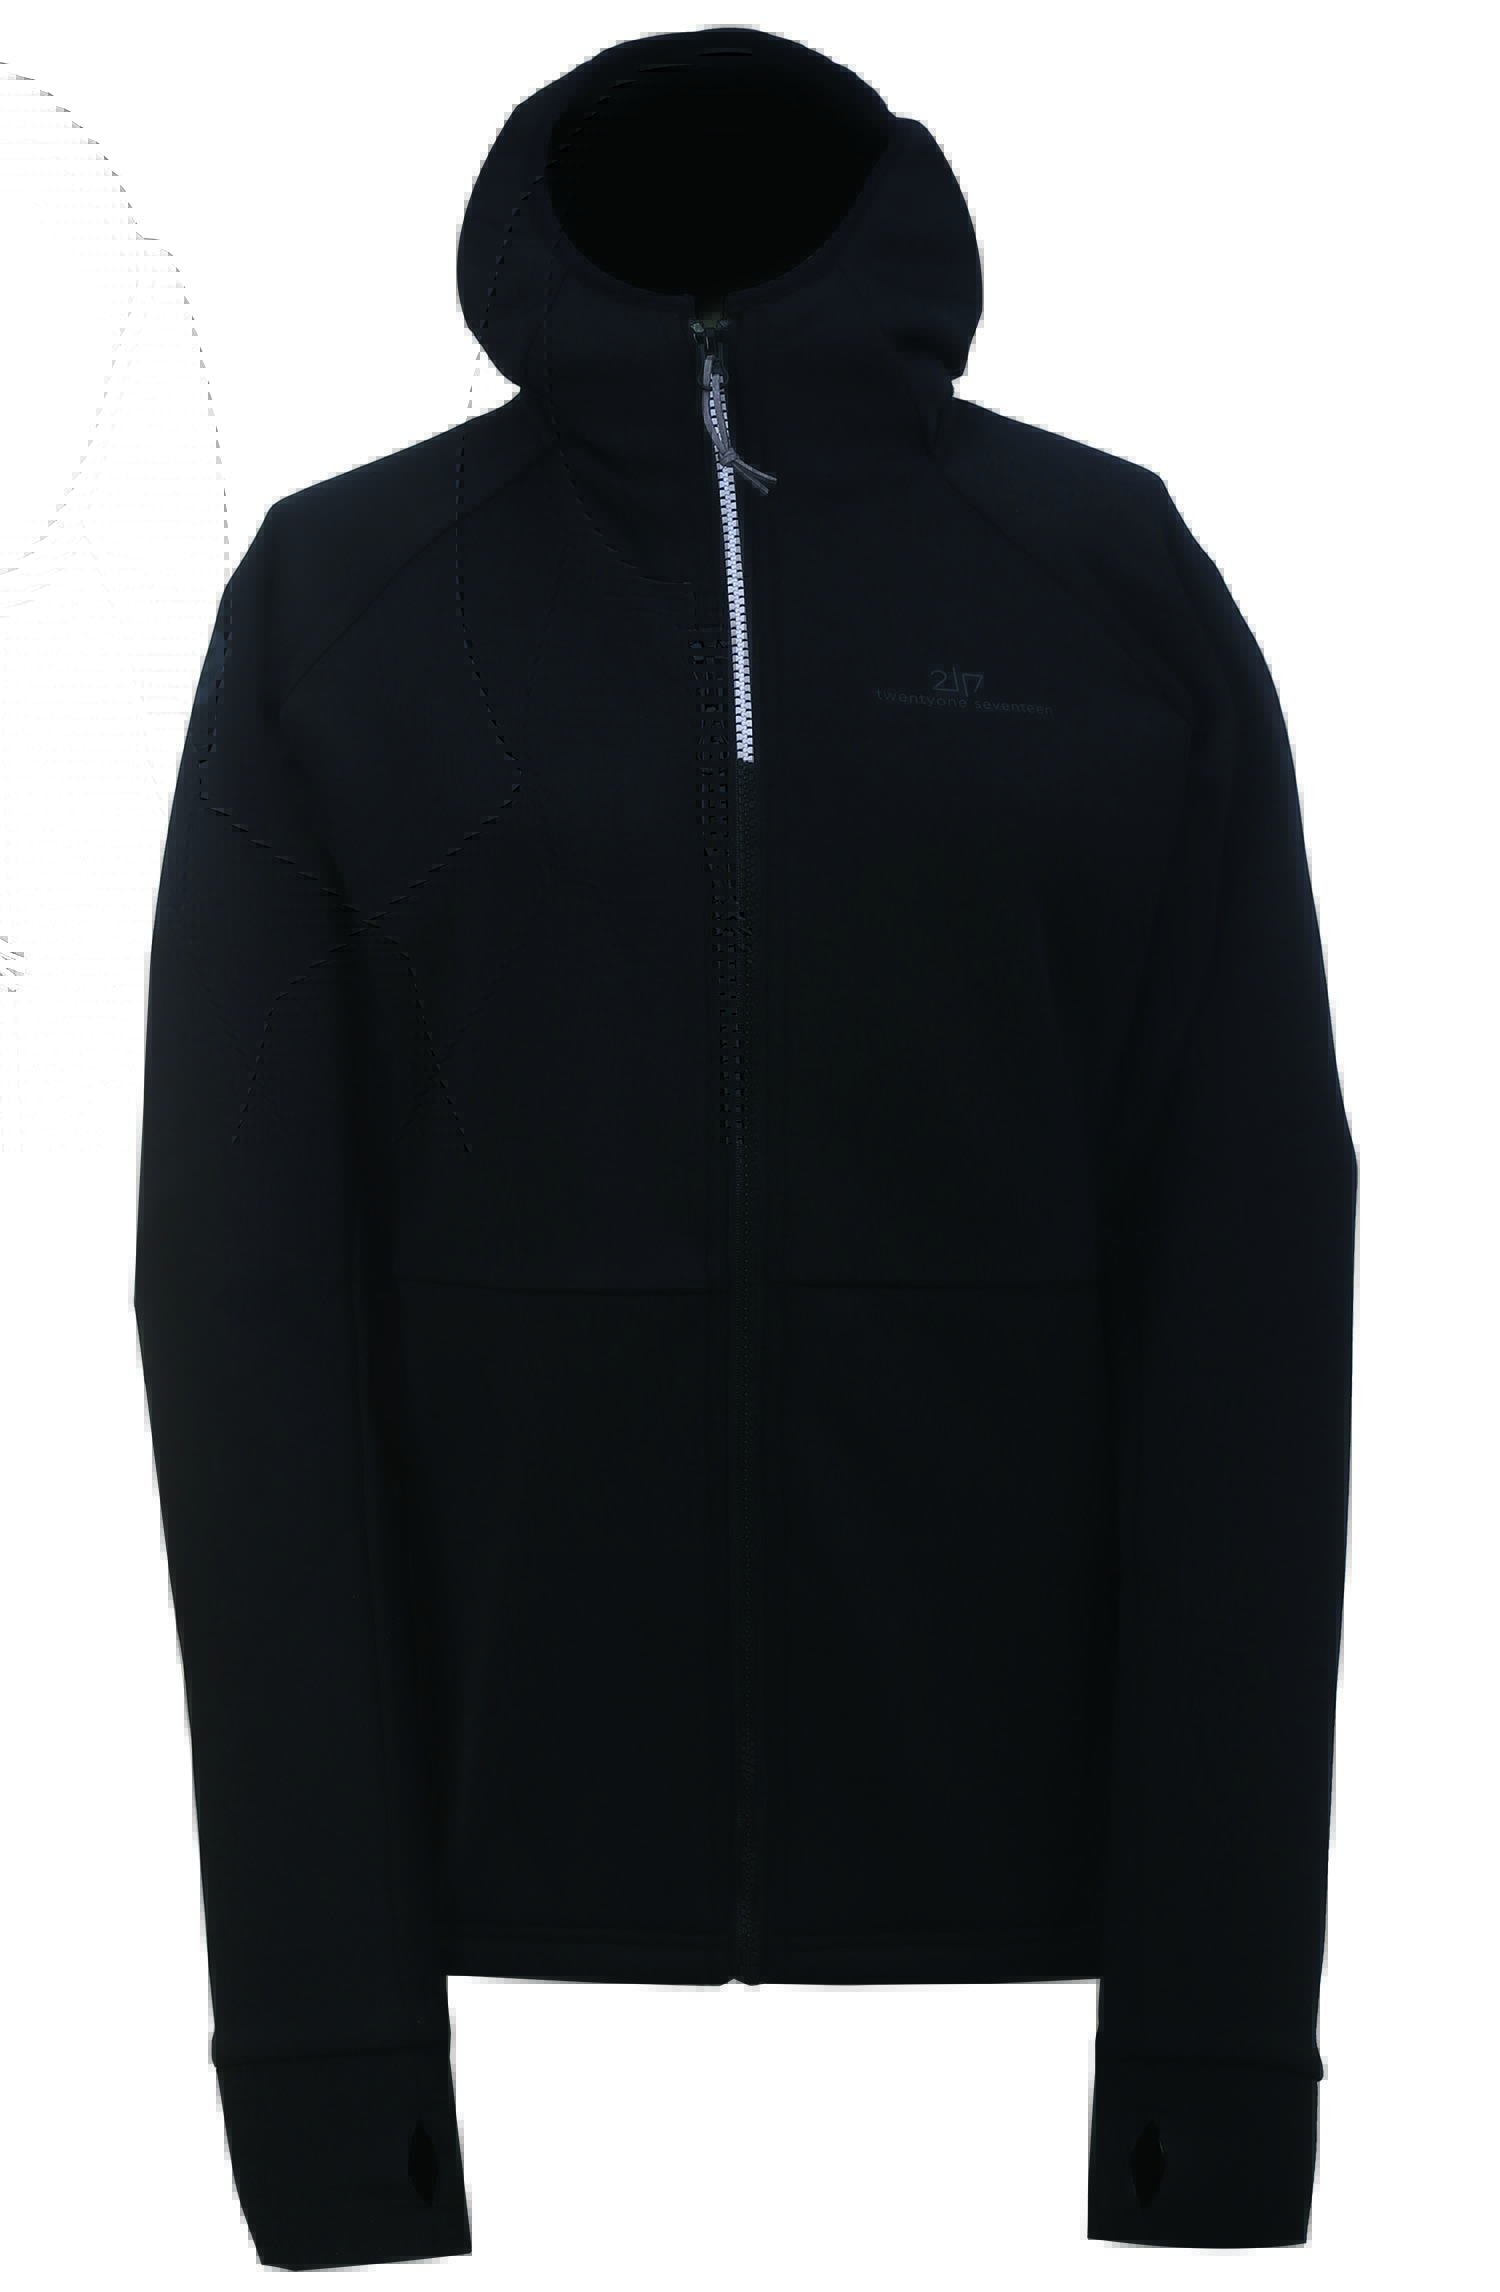 LINSELL - ECO women's hoodie (2nd layer) - black